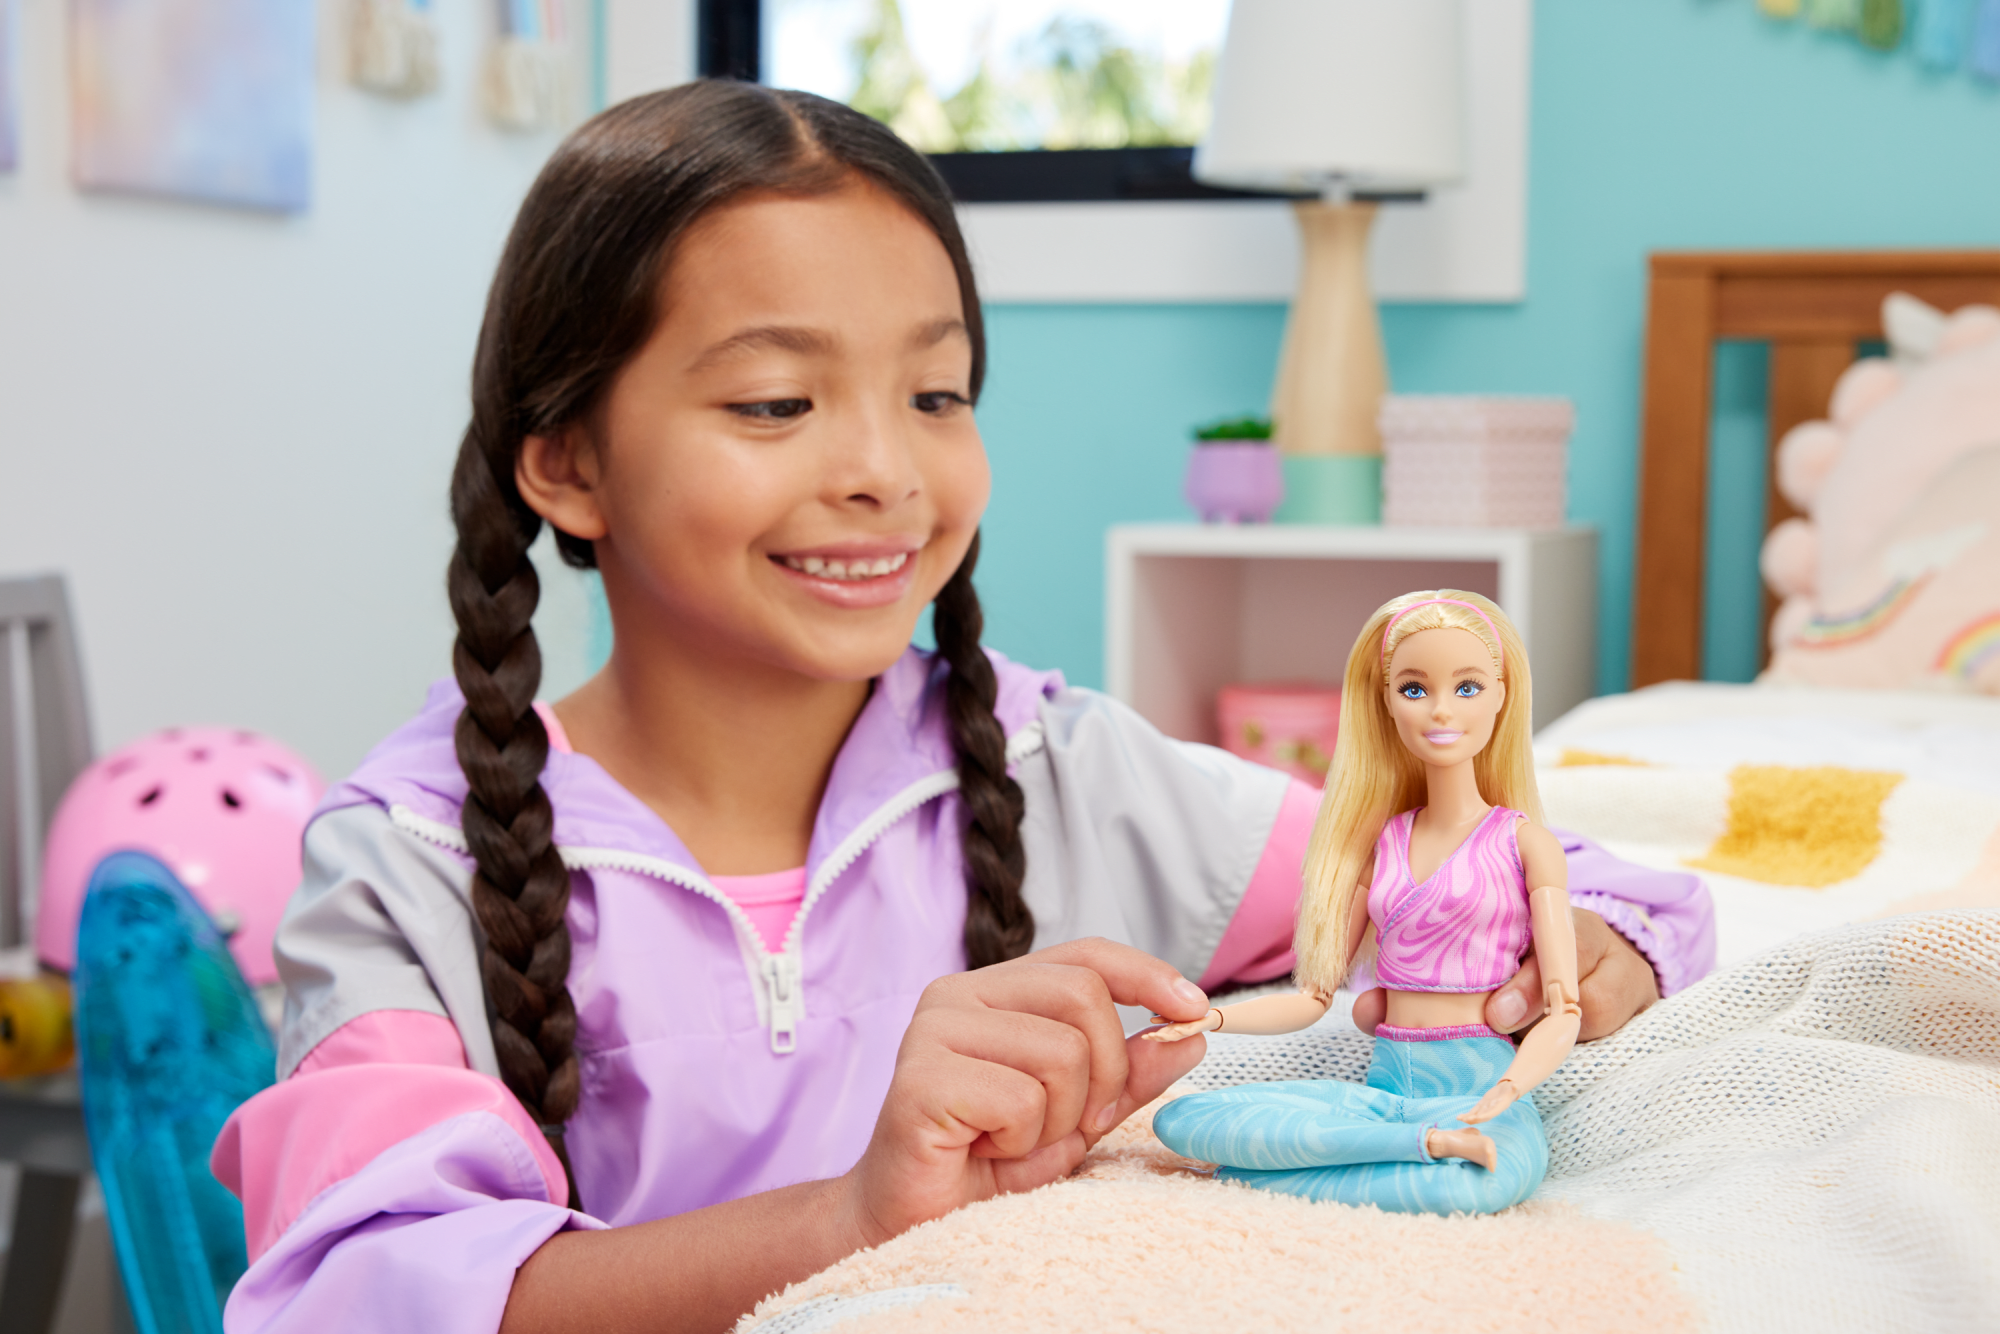 Barbie Made to Move Dolls with 22 Joints and Yoga Clothes, Floral